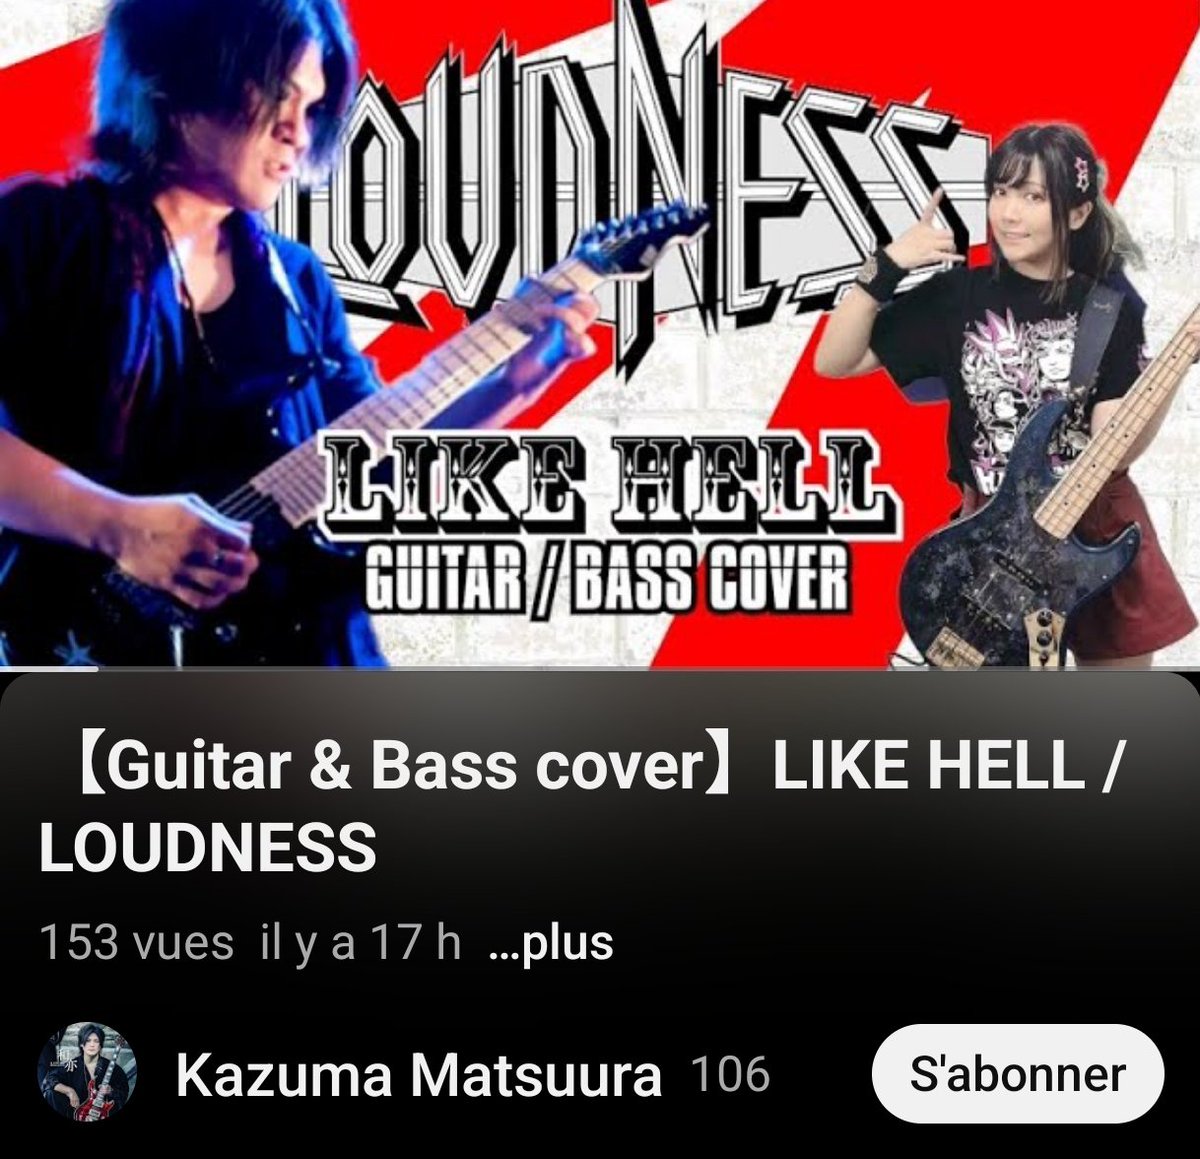 #NowWatching
#NewVideo
#MusicVideo
#youtubevideo
#BassCover
#FemaleBassist
#JapaneseBassist
#一ノ瀬 
#青色壱号
#Ichinose
#AoiroIchigo
#GuitarCover
#LOUDNESS

Again an awesome cover 🎸🎸 with KAZUMA from #DamianHamadasCreatures
! 🤘😈

Check it out too !🔥

youtu.be/aOSQYXhp0z4